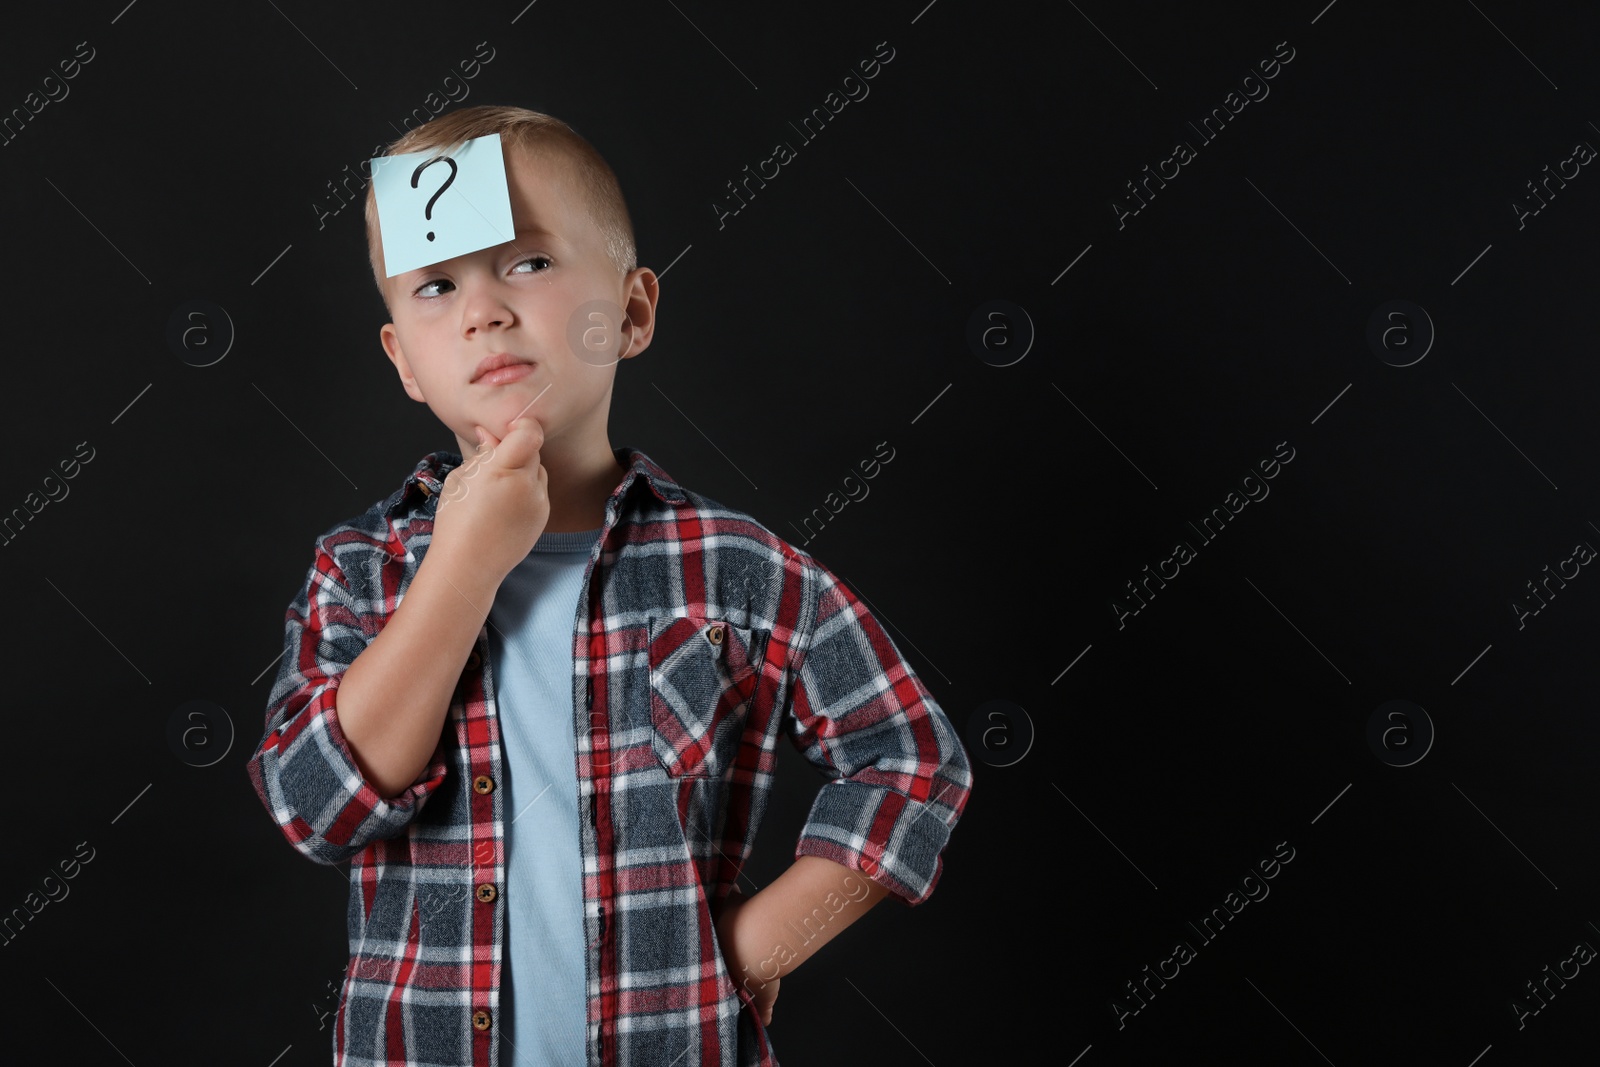 Photo of Pensive boy with question mark sticker on forehead against black background. Space for text